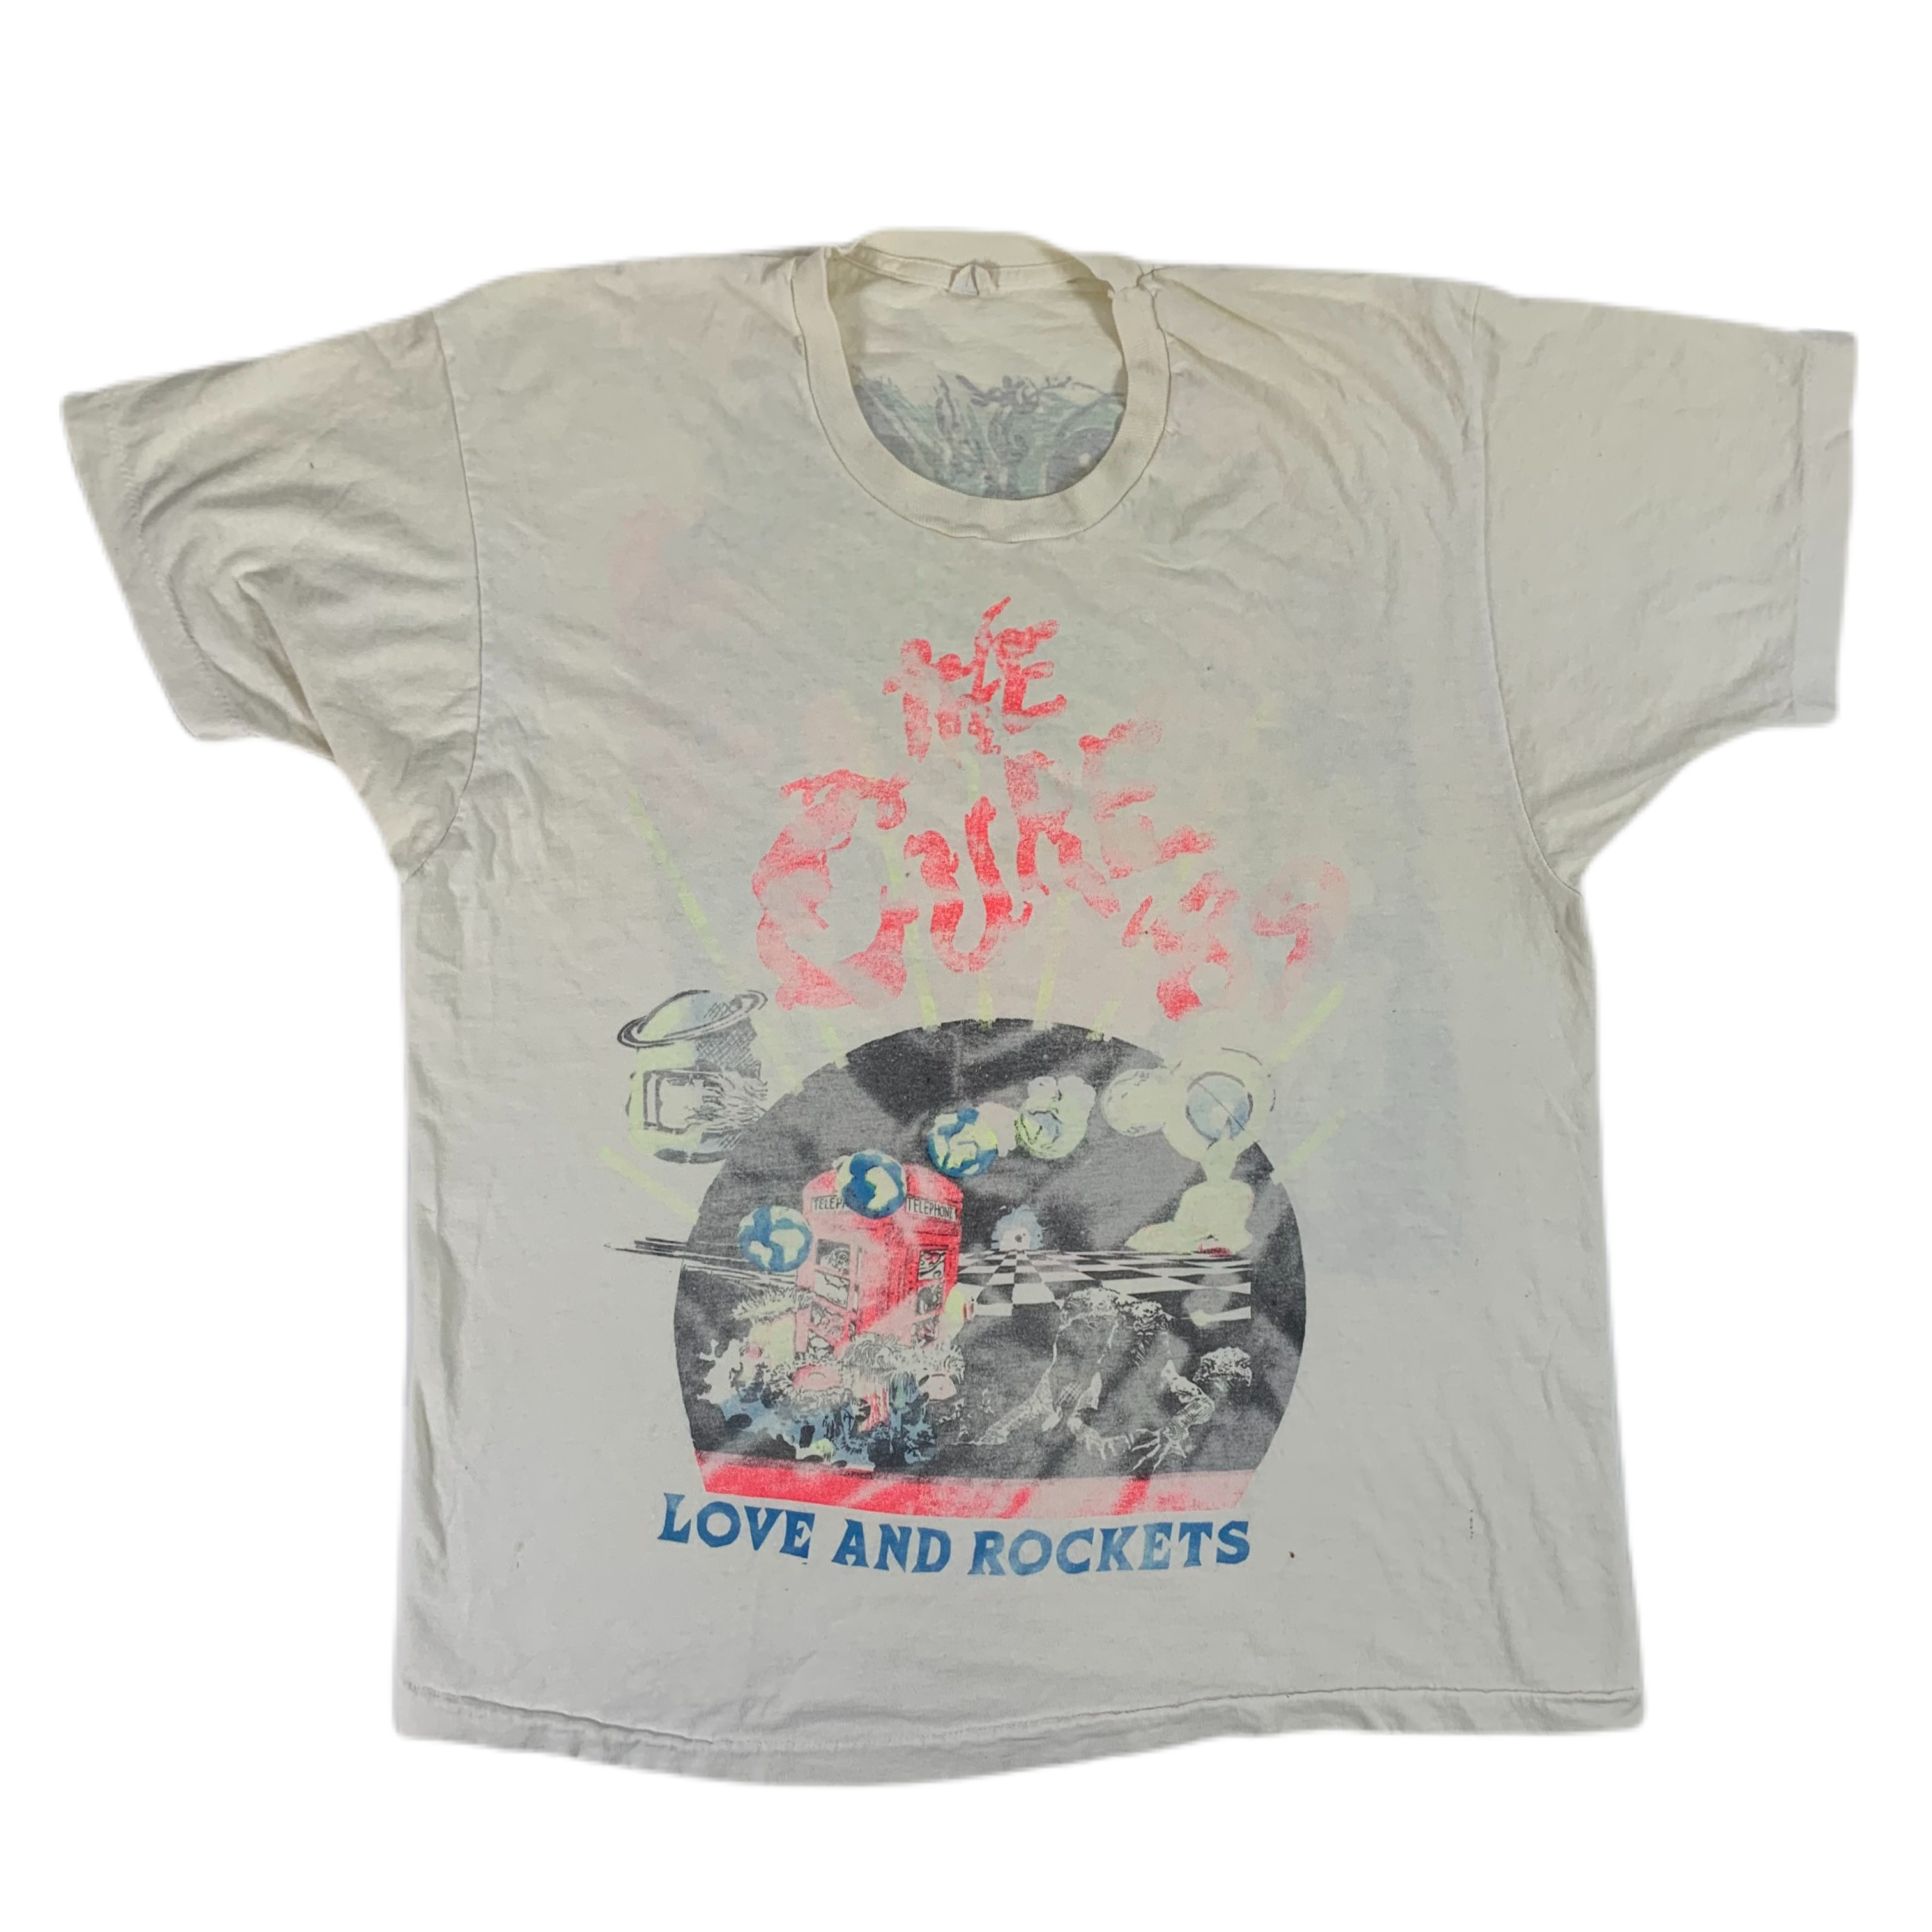 Vintage The Cure Love And Rockets 1989 Tour T-Shirt